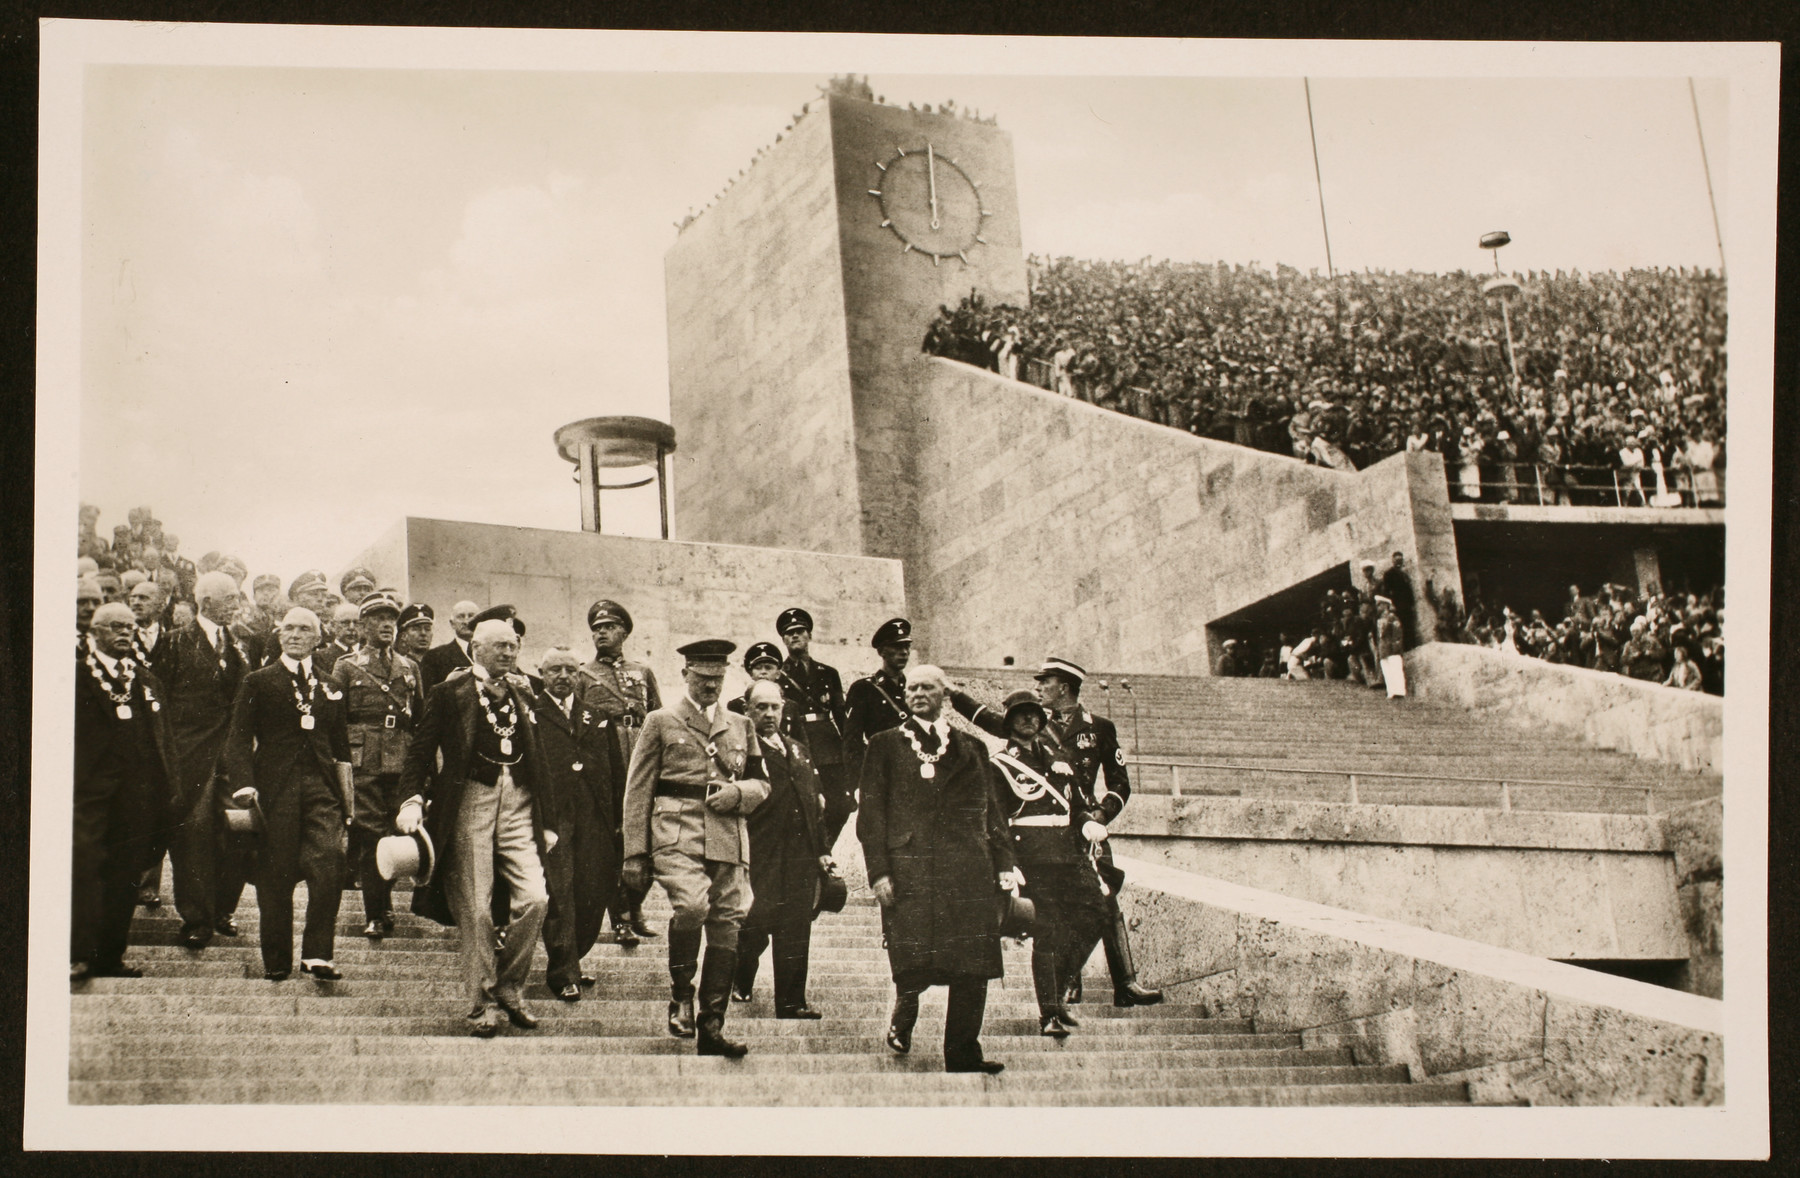 Hitler descends the stairs of the Olympic Stadium with several members of the International Olympic Committee, including Dr. Theo Lewald (R) and Henri de Baillet-Latour, the IOC president (L), to open the 11th Olympic Games.